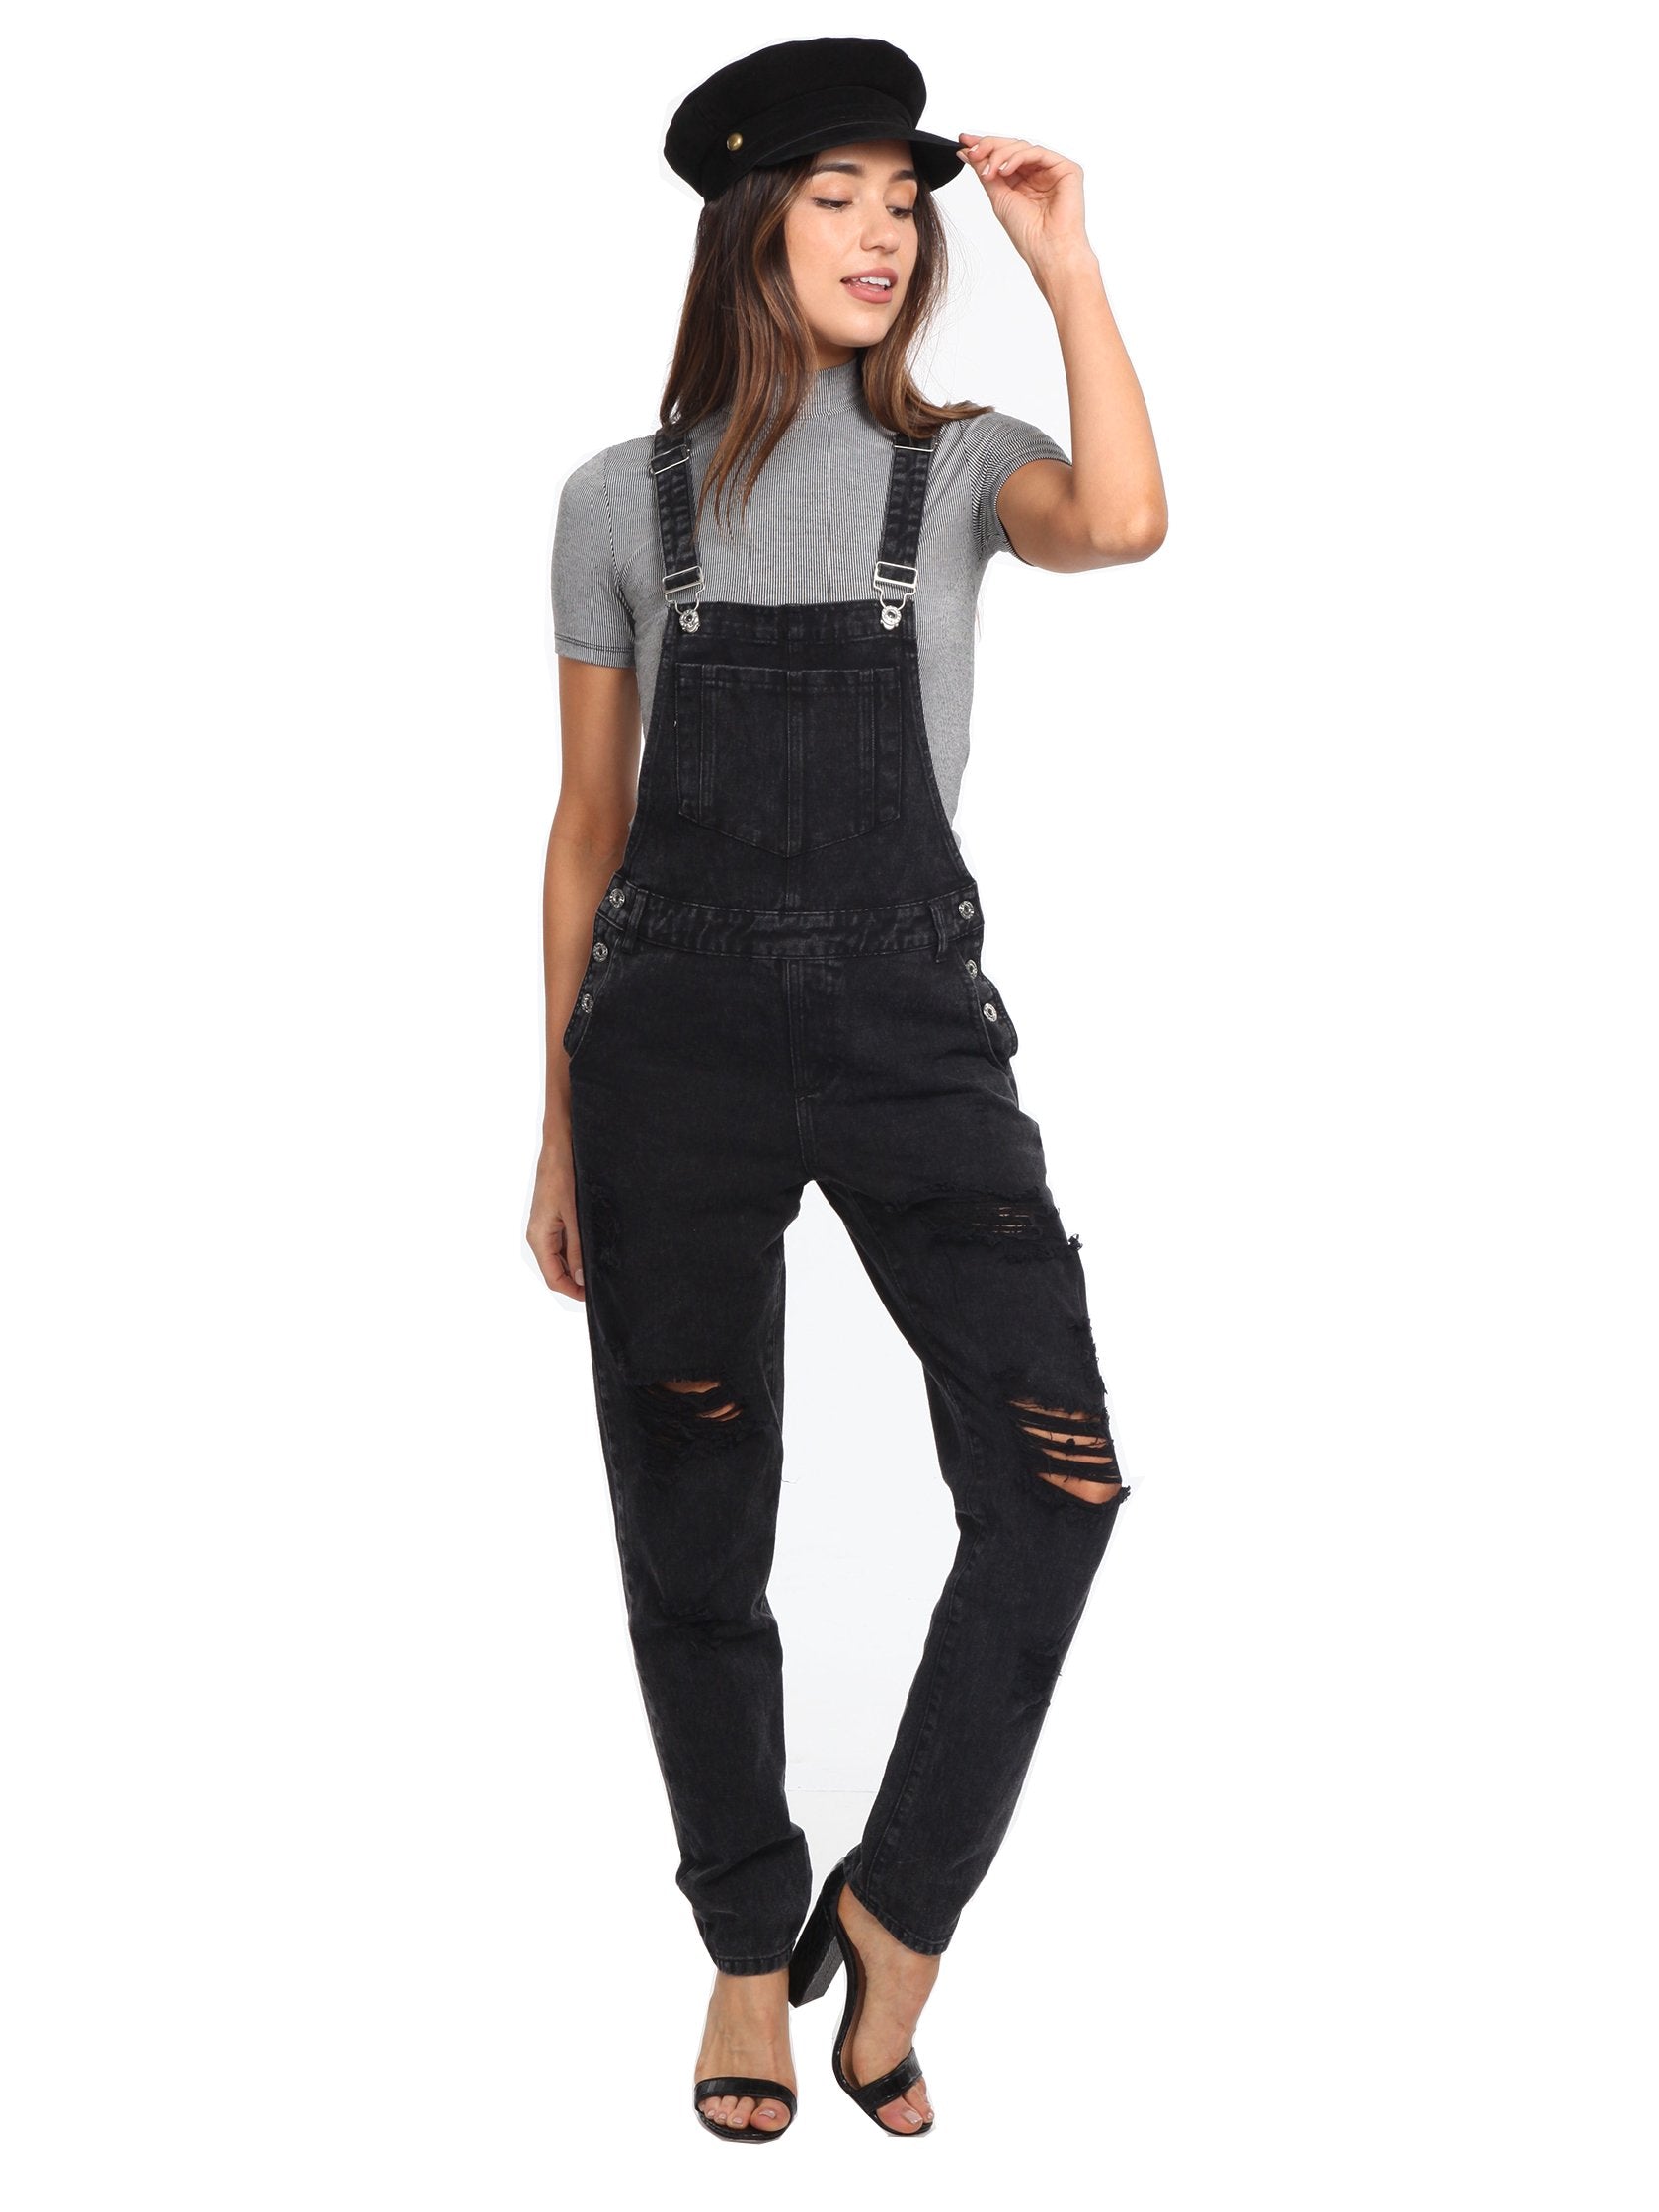 Girl wearing a jumpsuit rental from FashionPass called Here For A Good Time Overalls